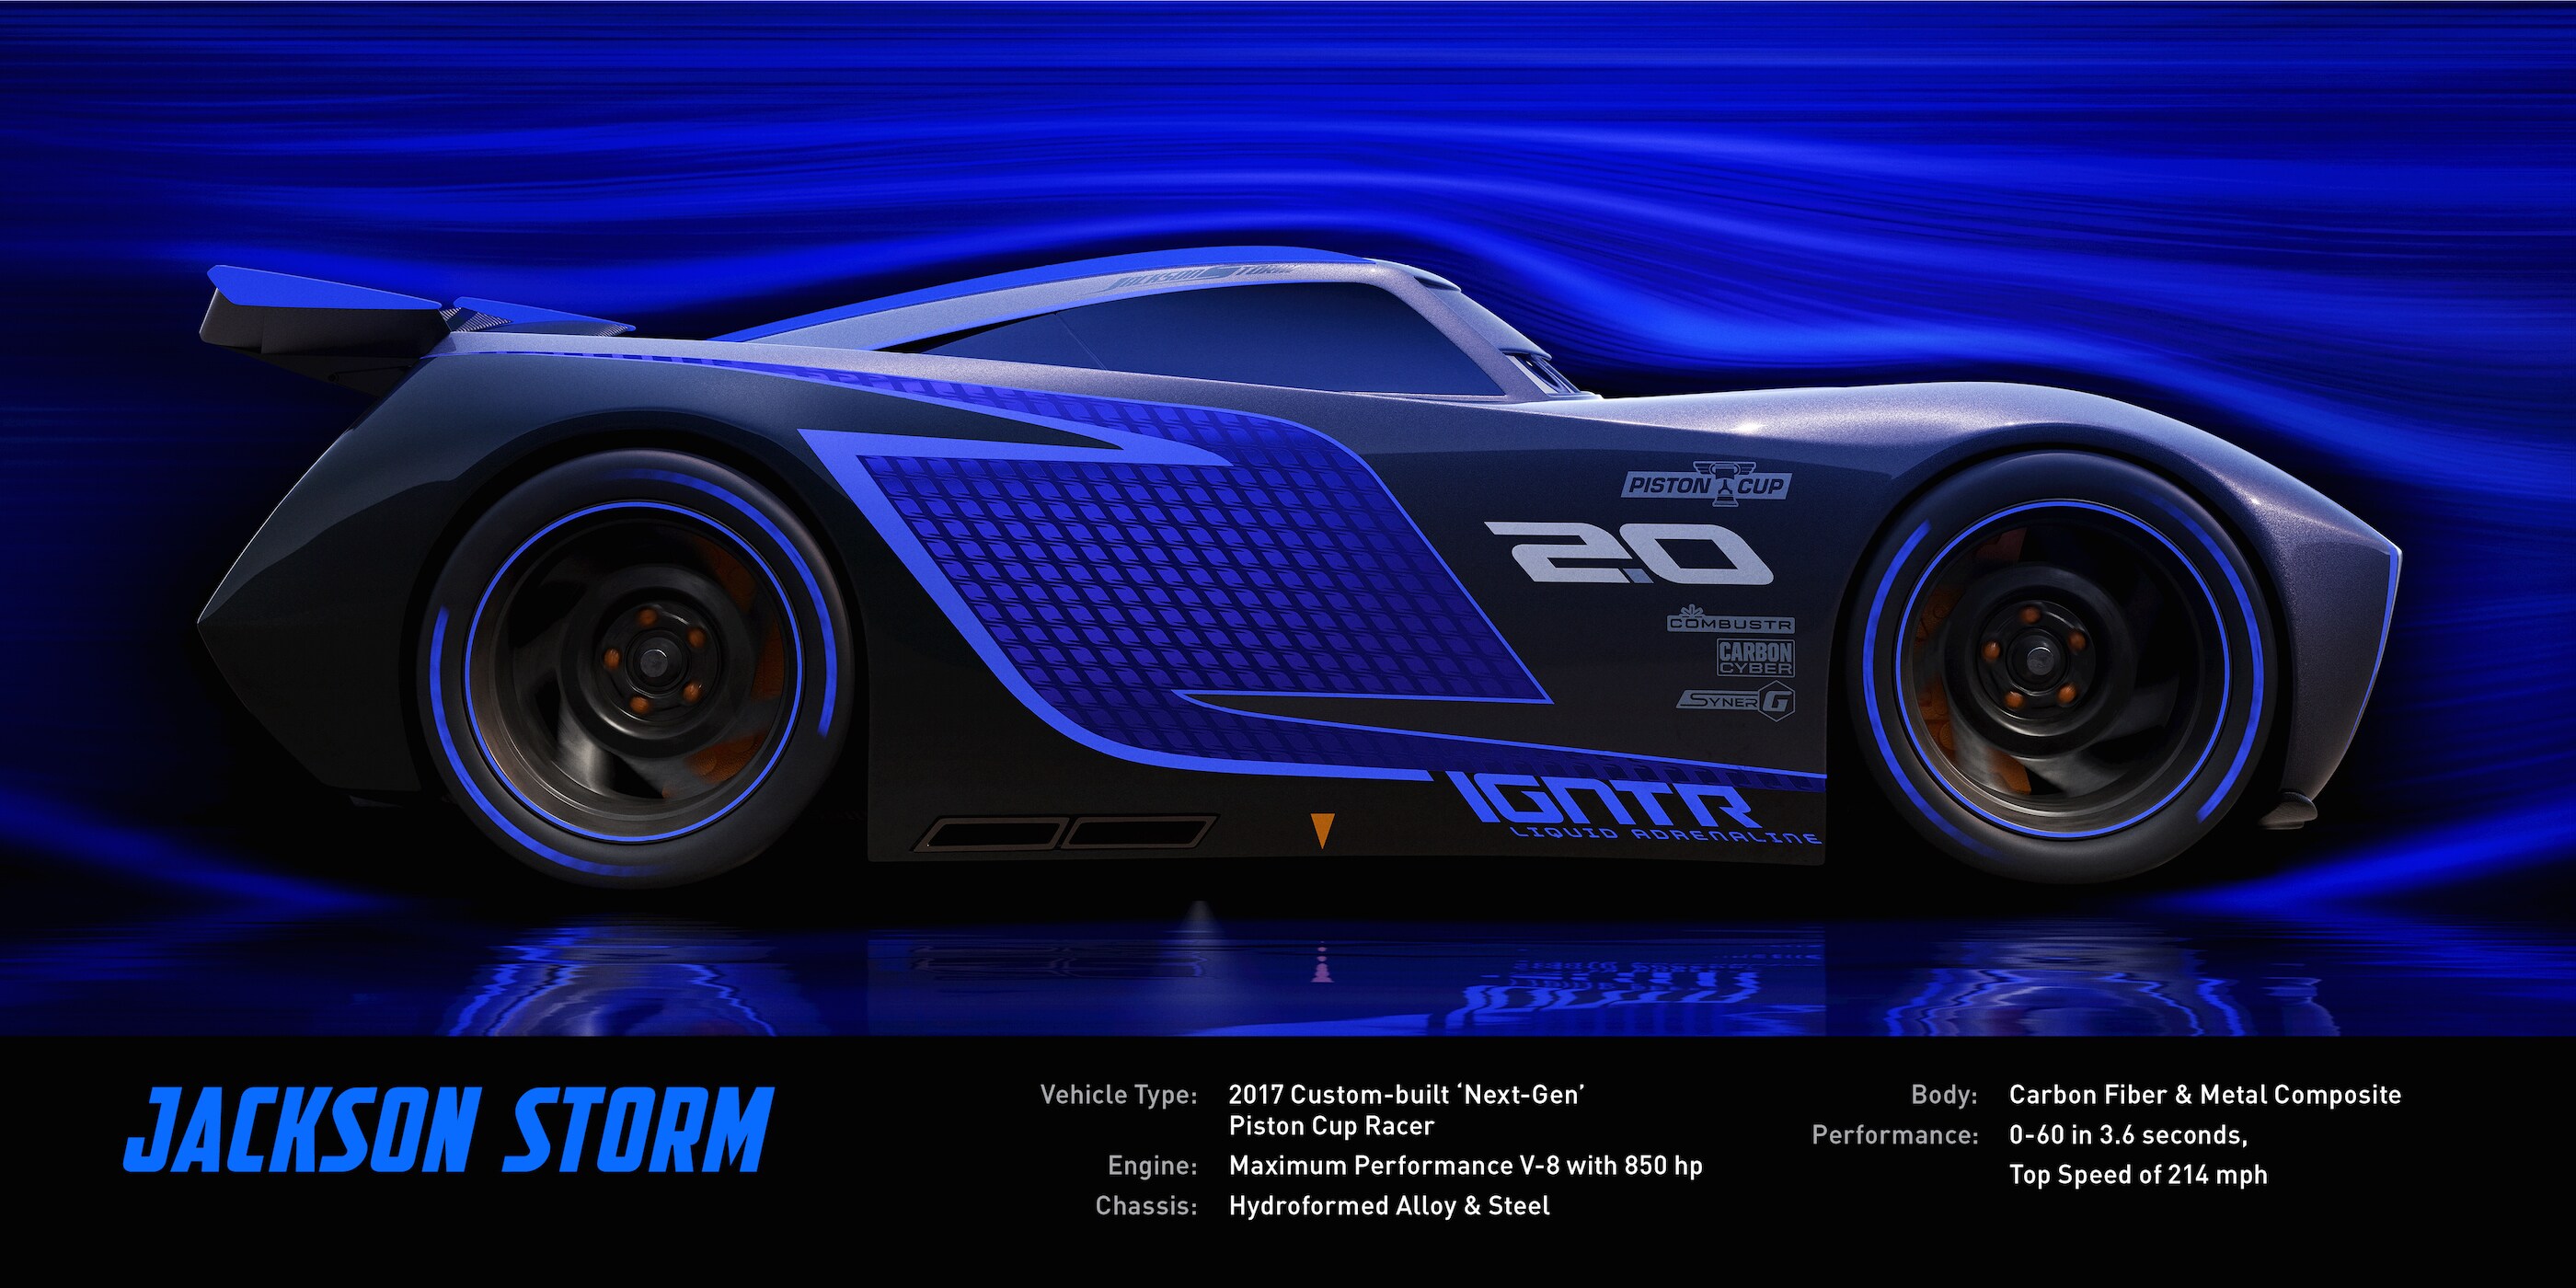 Jackson Storm - Vehicle Type: 2017 Custom-built 'Next-Gen' Piston Cup Race, Engine: Maximum Performance V-8 with 850 hp, Chassis: Hydroformed Alloy & Steel, Body: Carbon Fiber & Metal Composite, Performance: 0-60 in 3.6 seconds, Top Speed of 214 mph